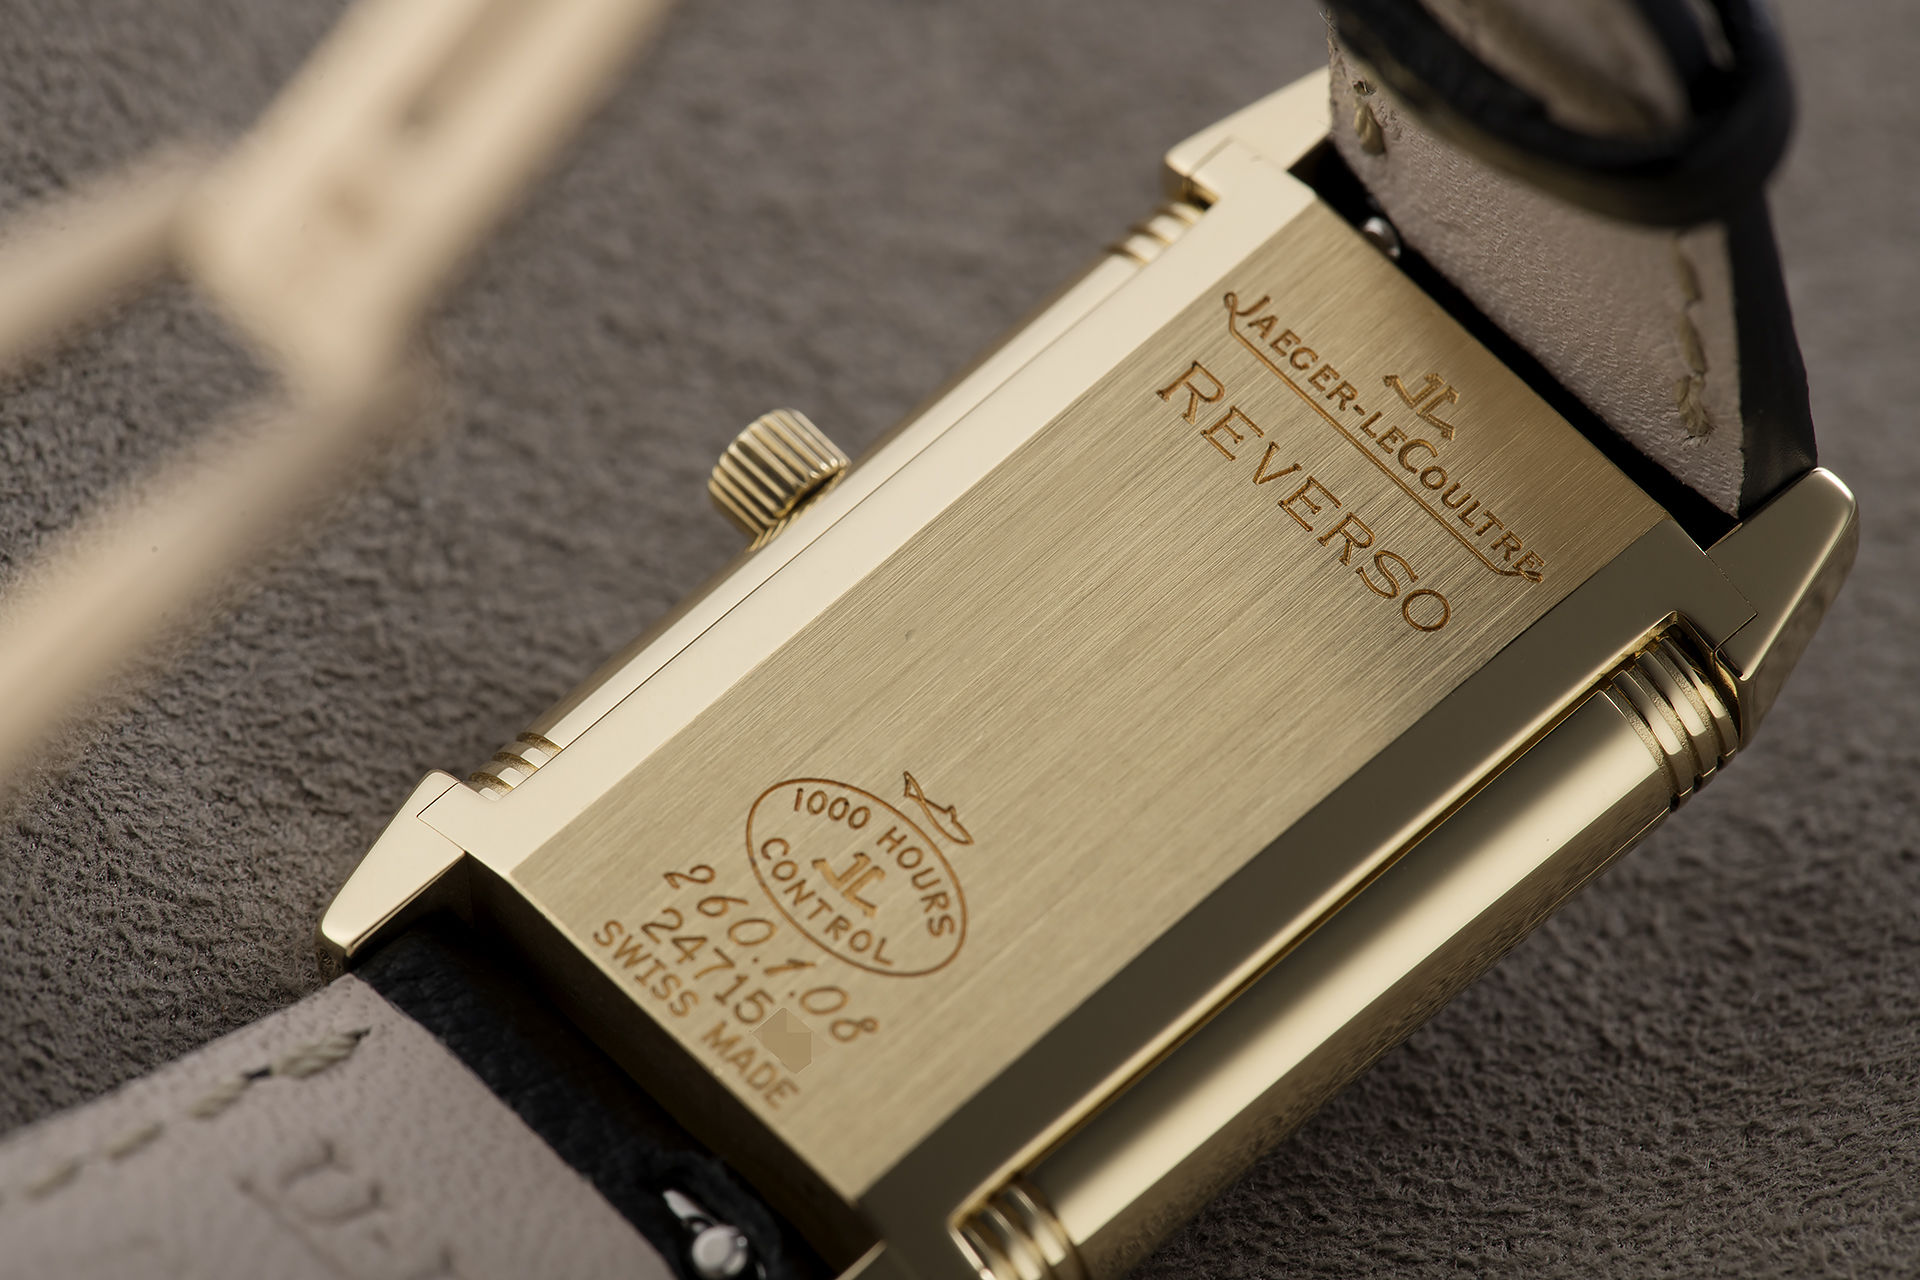 ref 260.1.08 | Yellow Gold | Jaeger-leCoultre Reverso